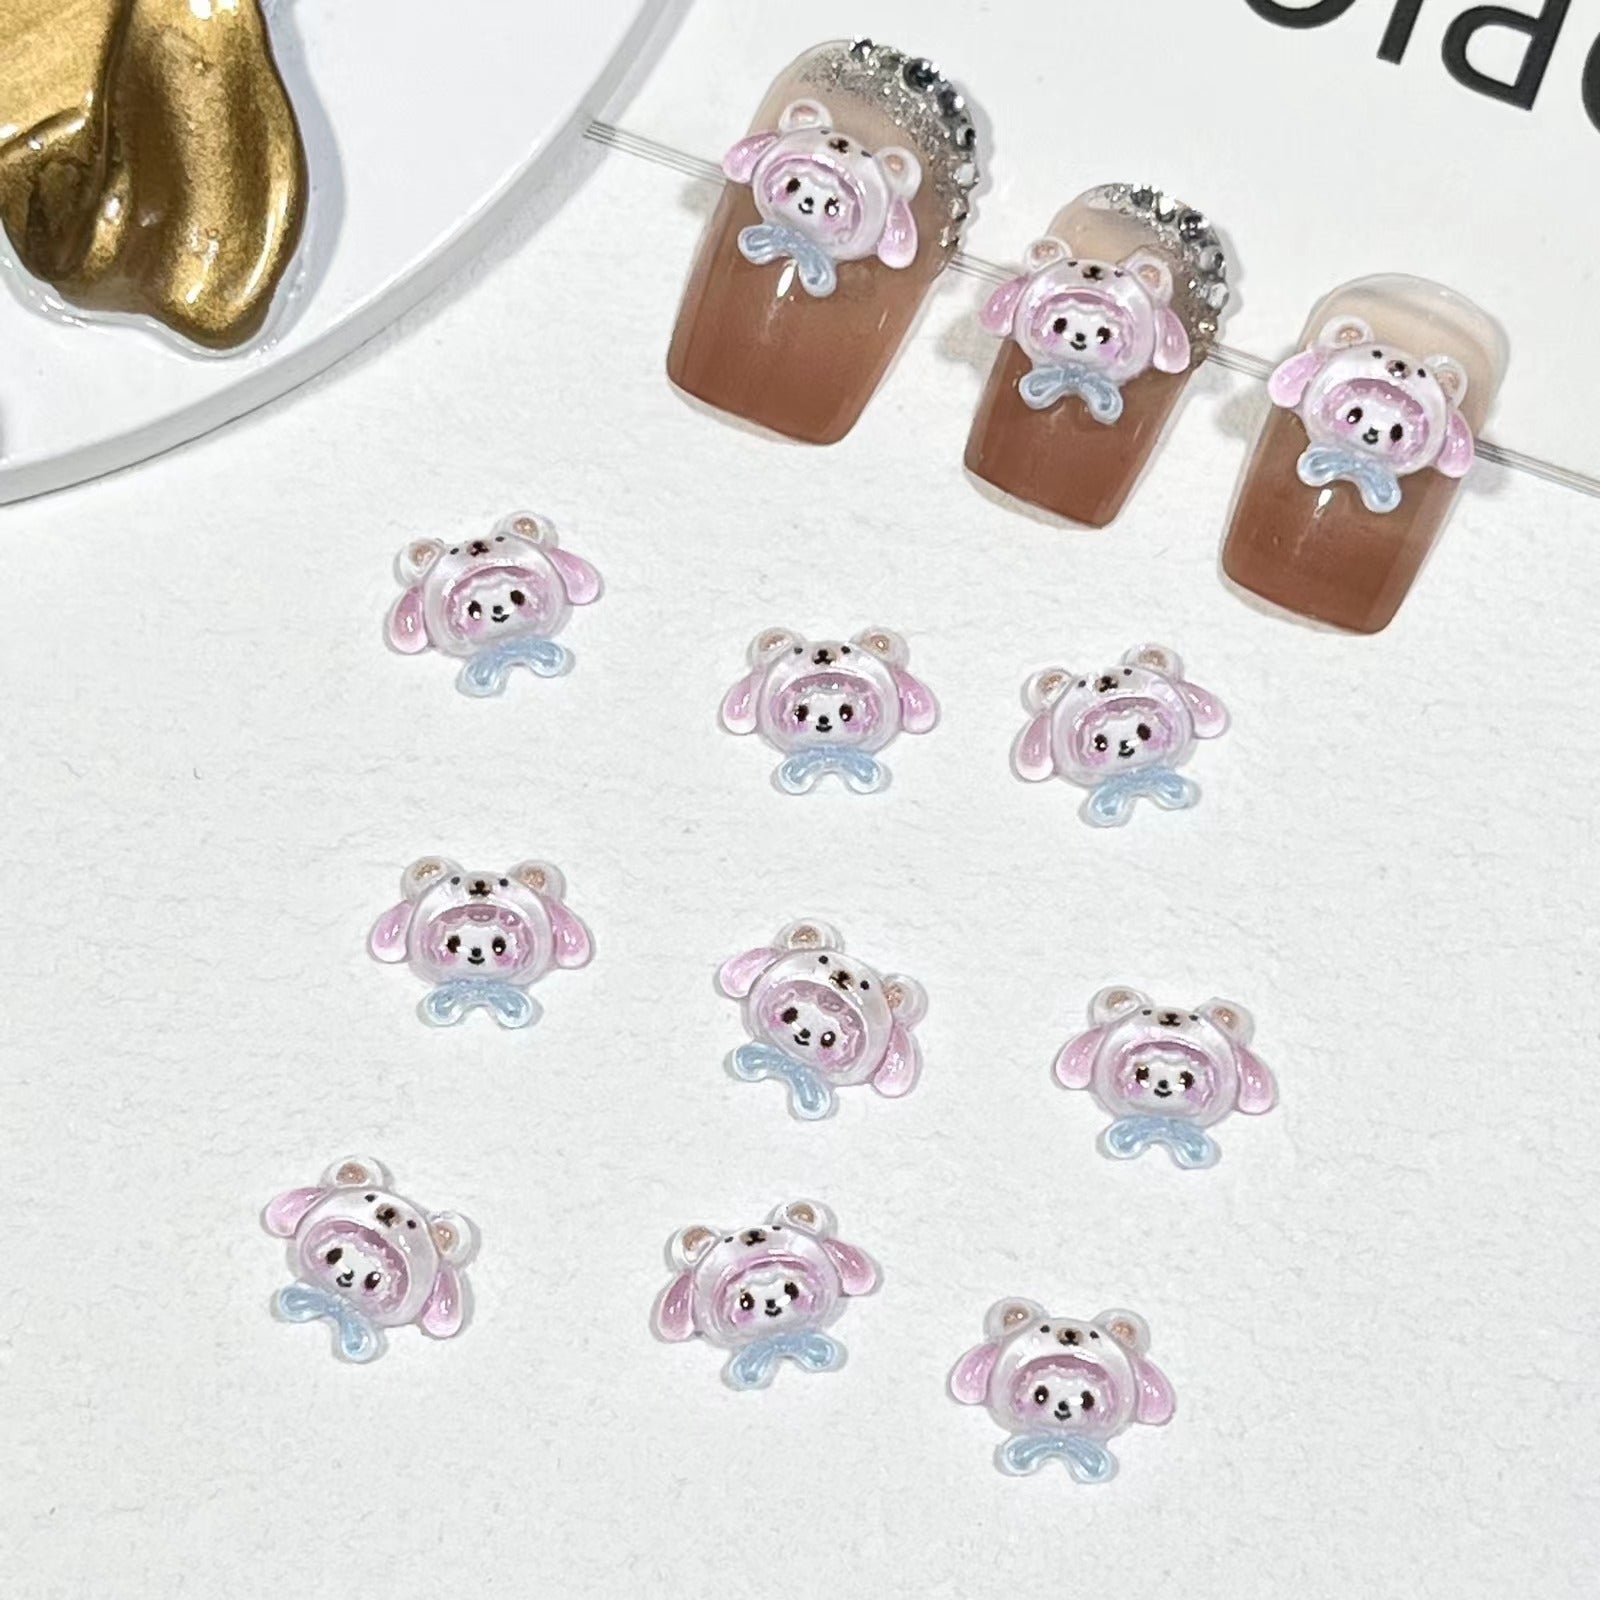 #115 Cute Cozy My Melody in Bear Hat Nail Charm